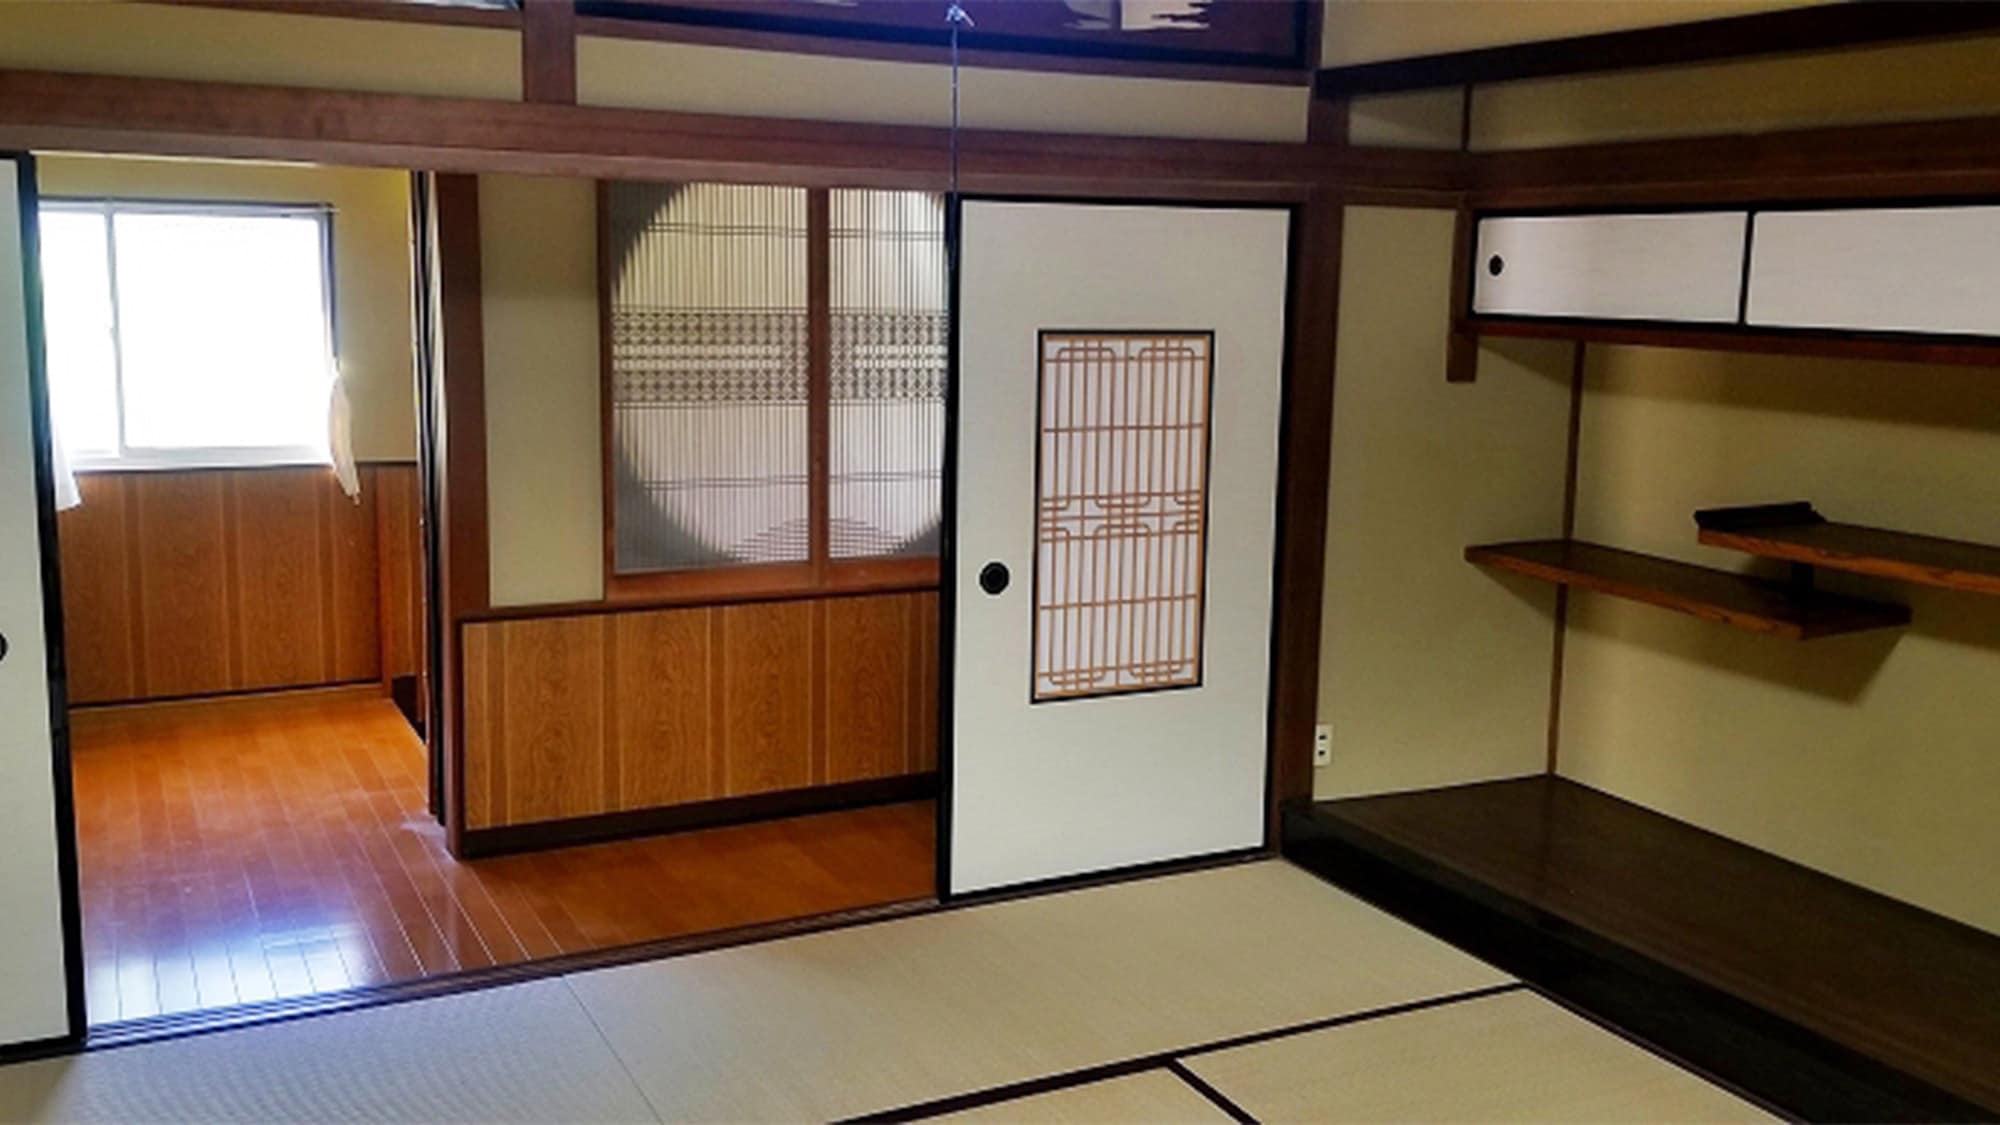 ・ When you open the sliding doors, you will feel a sense of openness. It's okay to relax on tatami mats